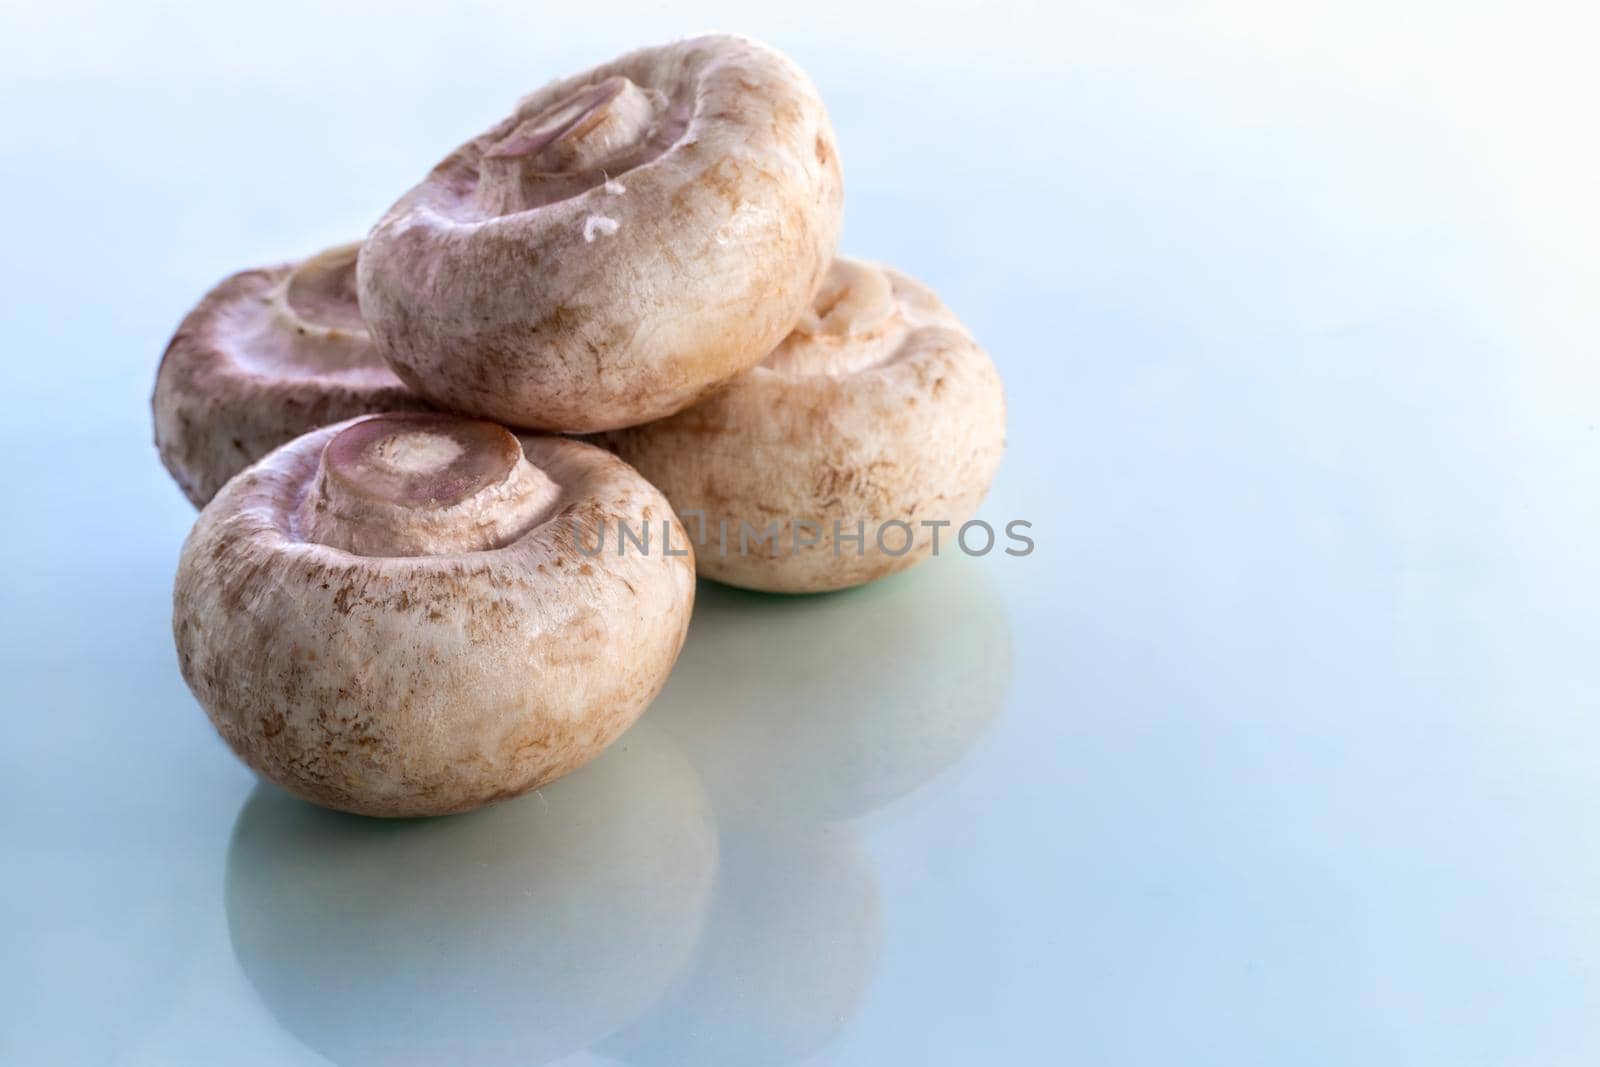 A few fresh raw mushrooms on a light background. Front view, close-up, copy space